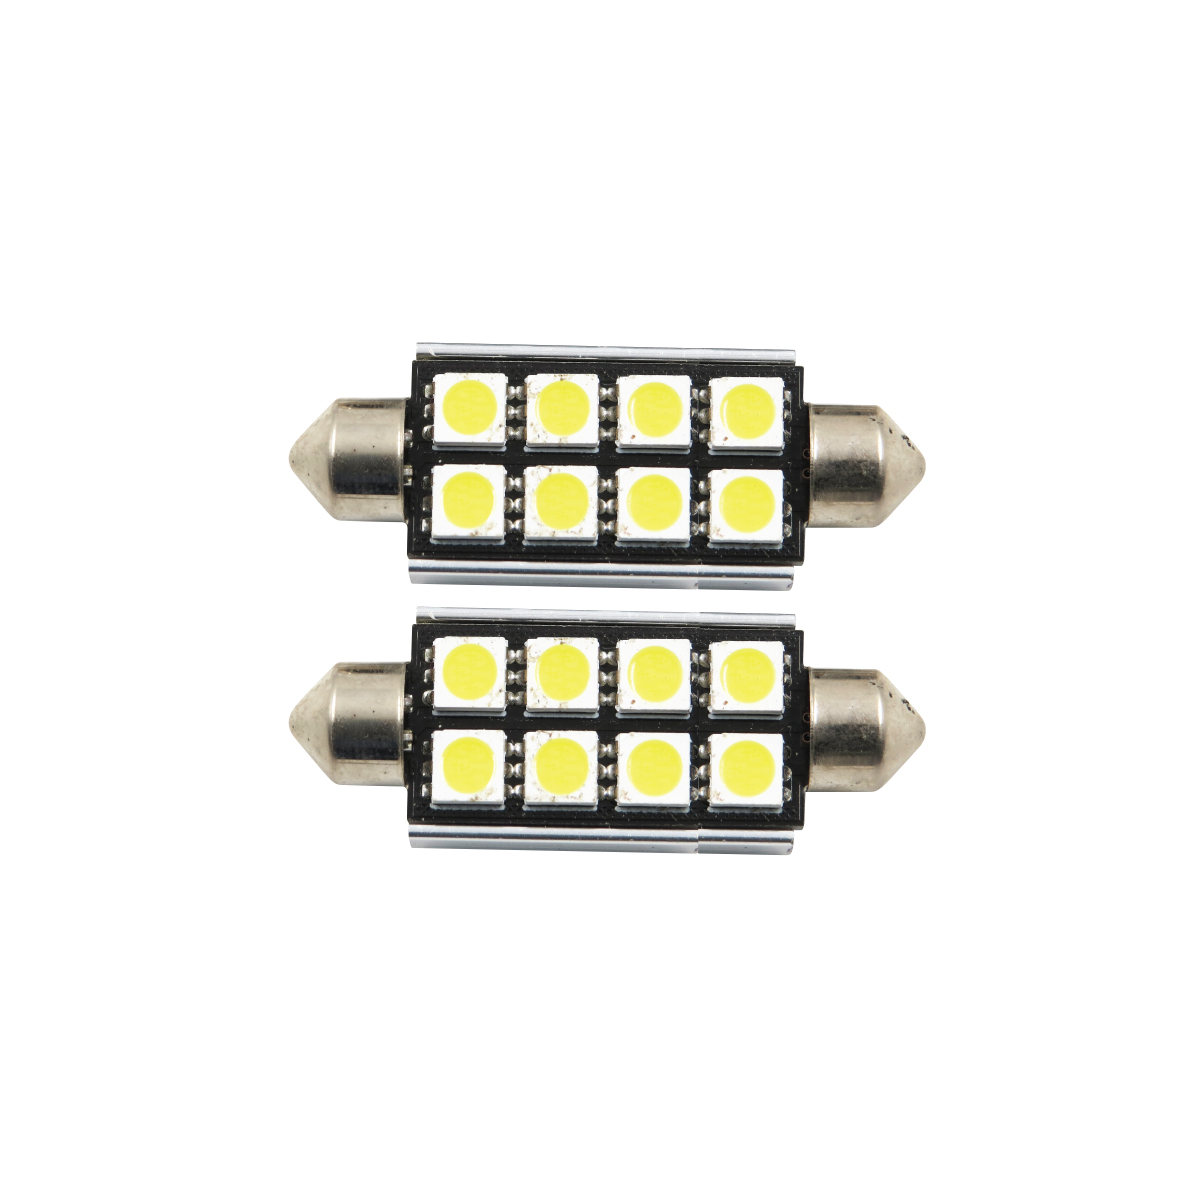 INTERIOR CANBUS 8 SMD